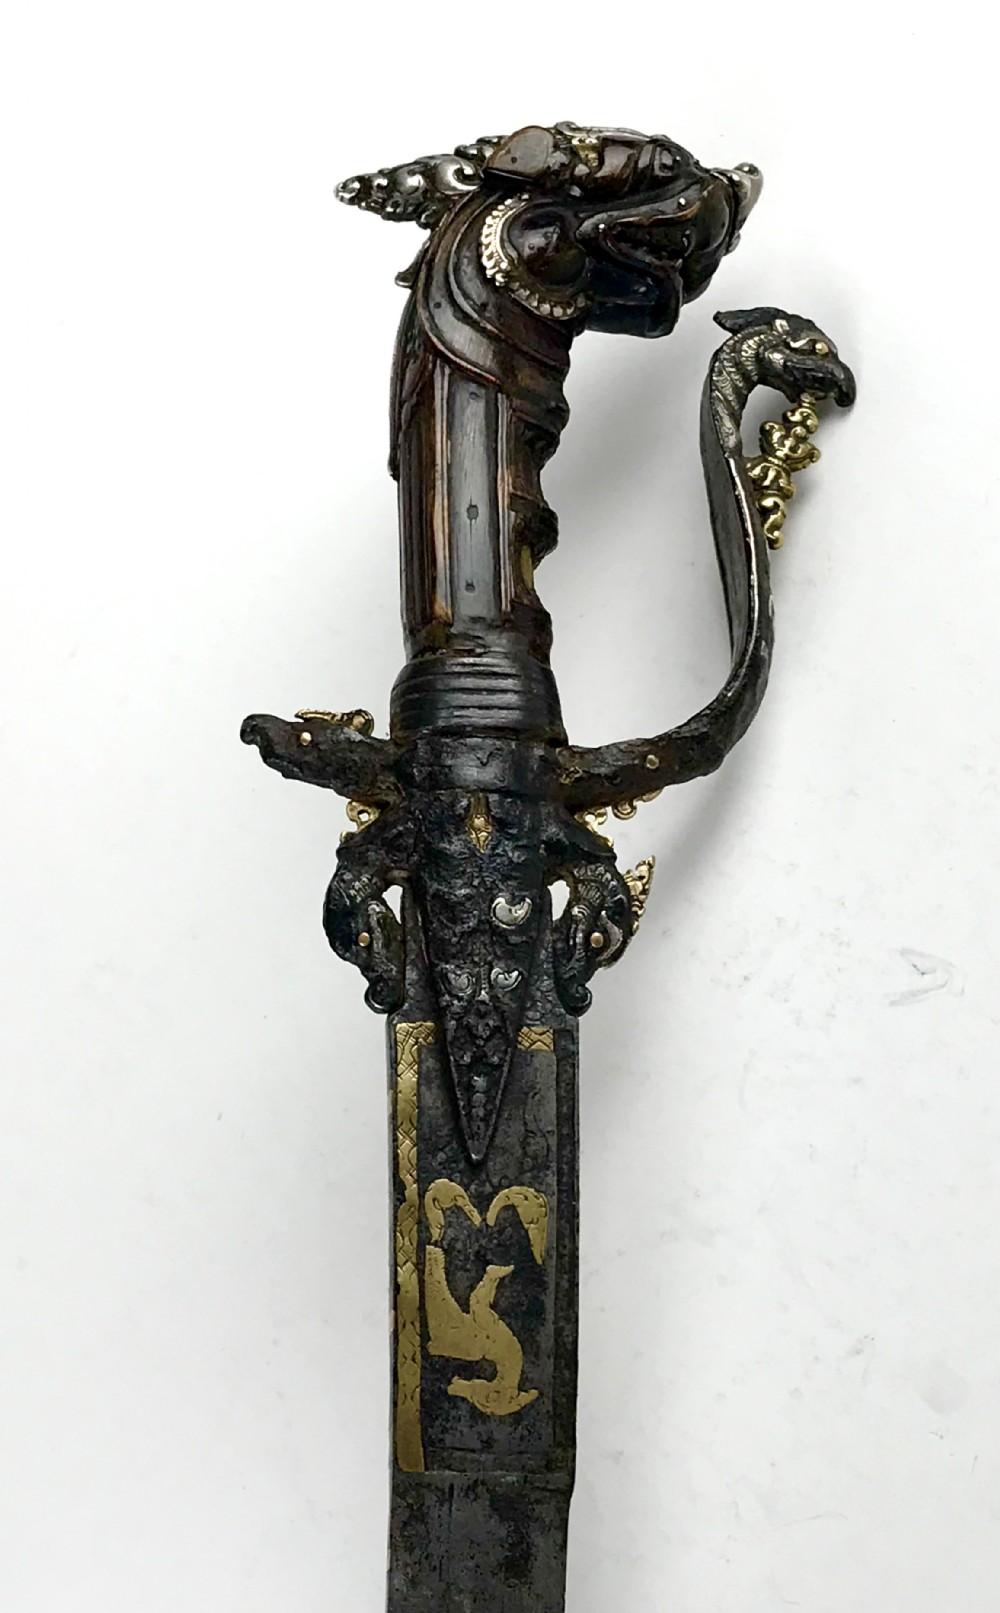 Magnificent Sinhalese Portuguese Kastane Rhino Ceremonial Ceylon Sword 17th C In Good Condition For Sale In London, GB